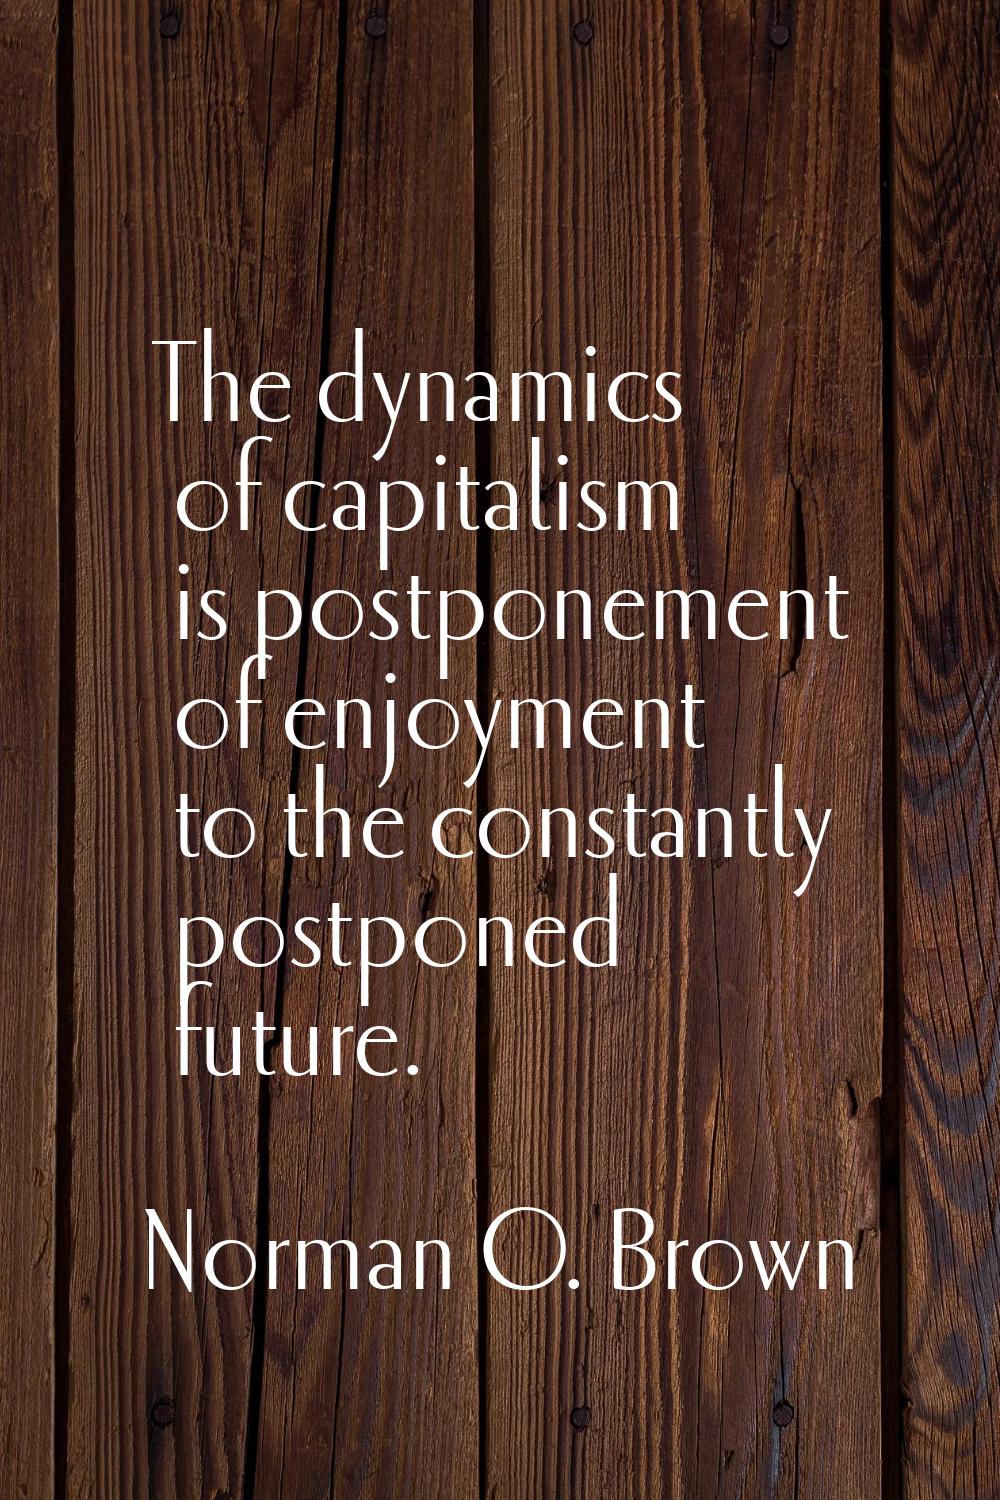 The dynamics of capitalism is postponement of enjoyment to the constantly postponed future.